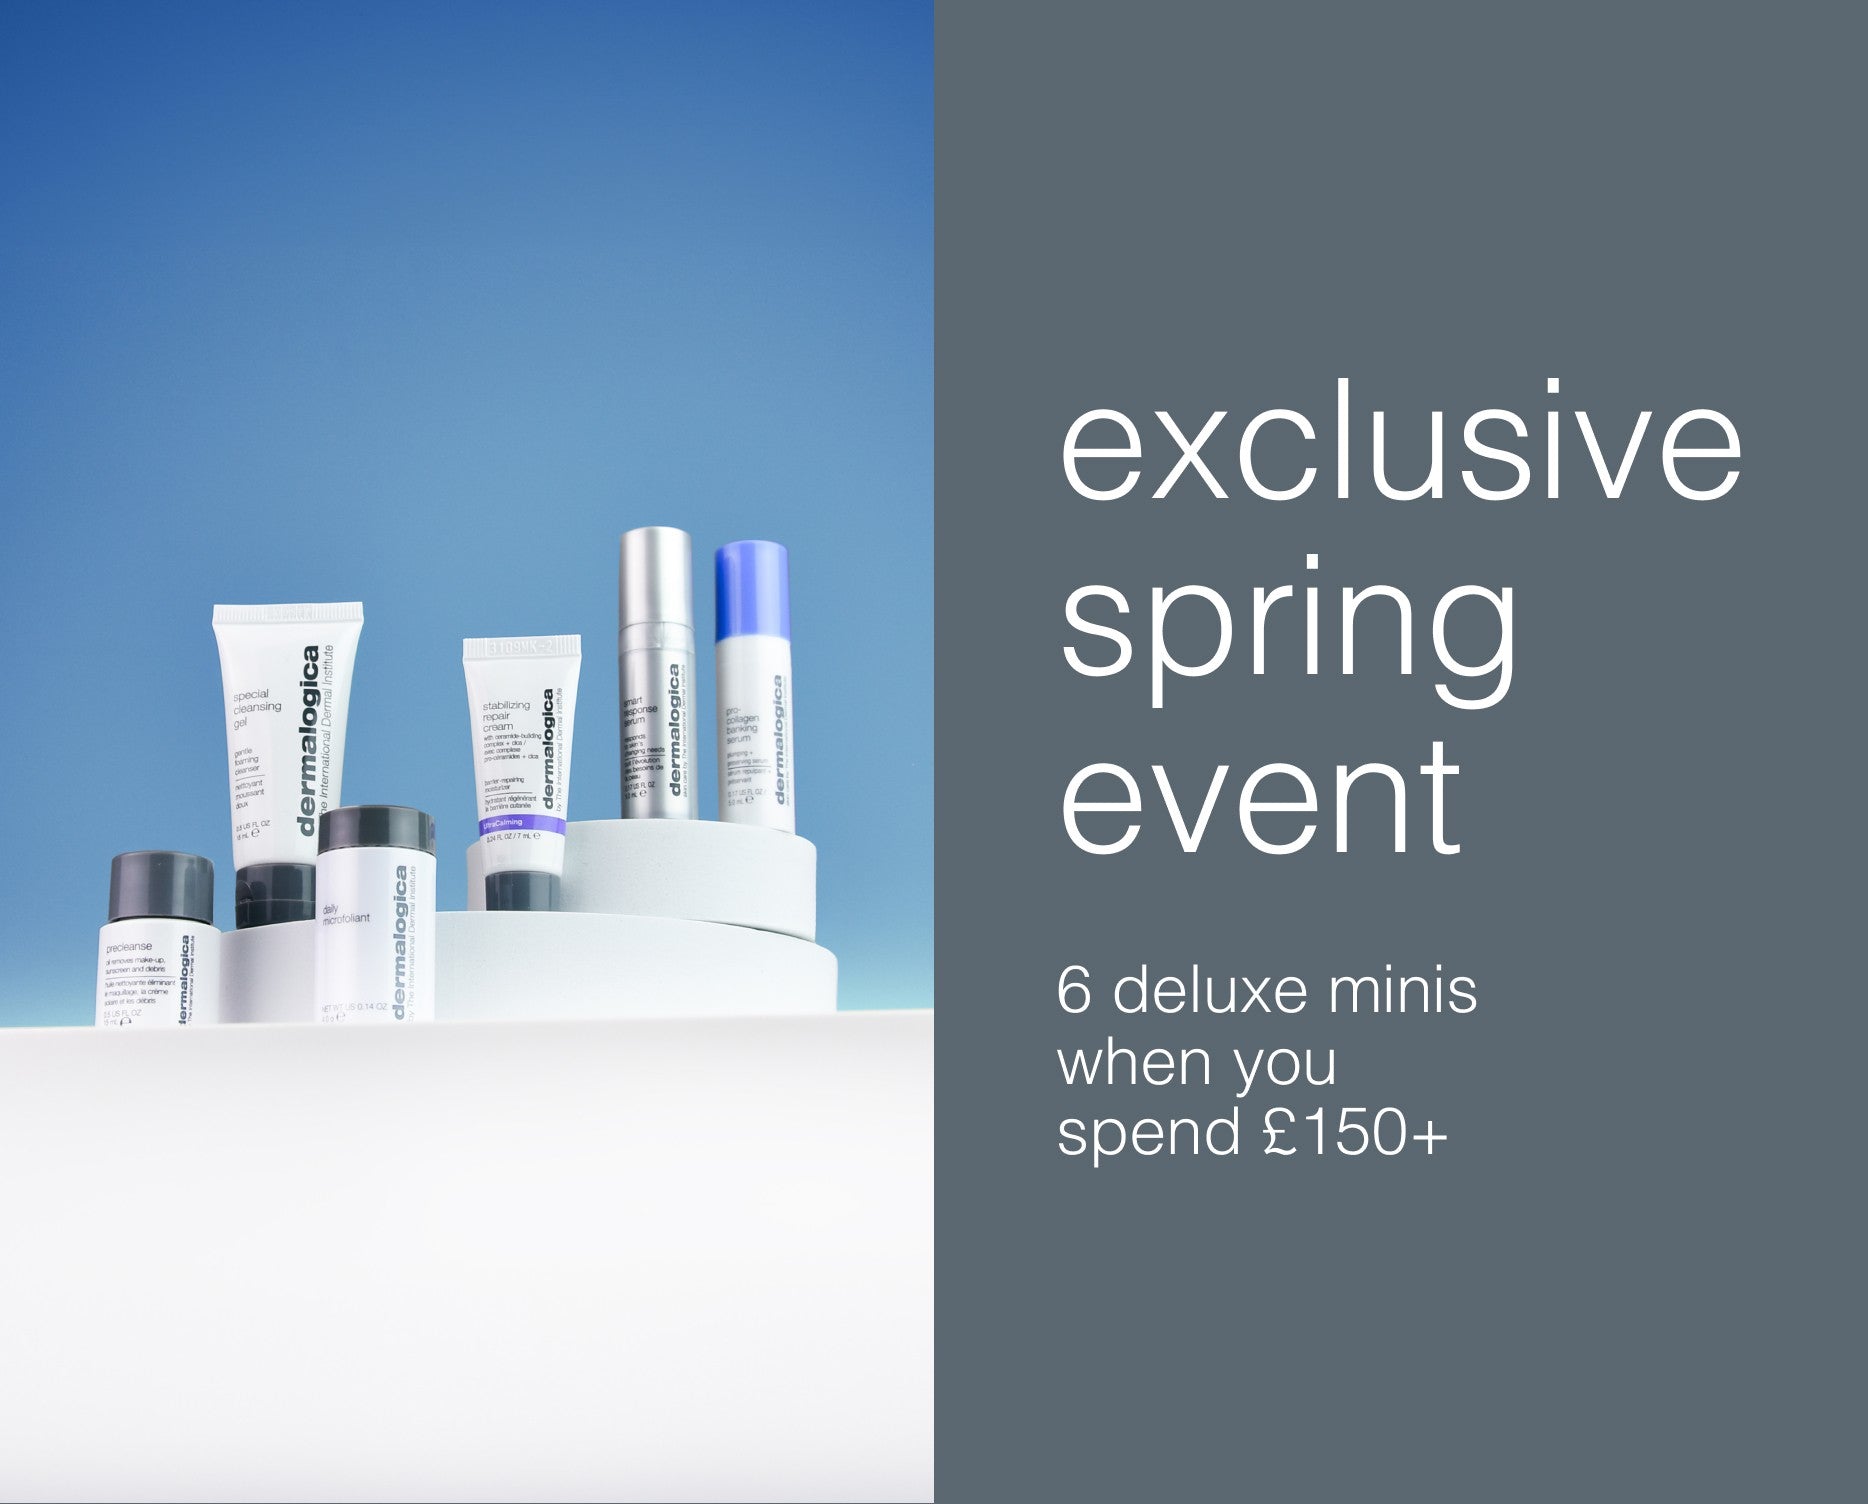 Exclusive Spring Event, 6 deluxe minis when you spend £150+